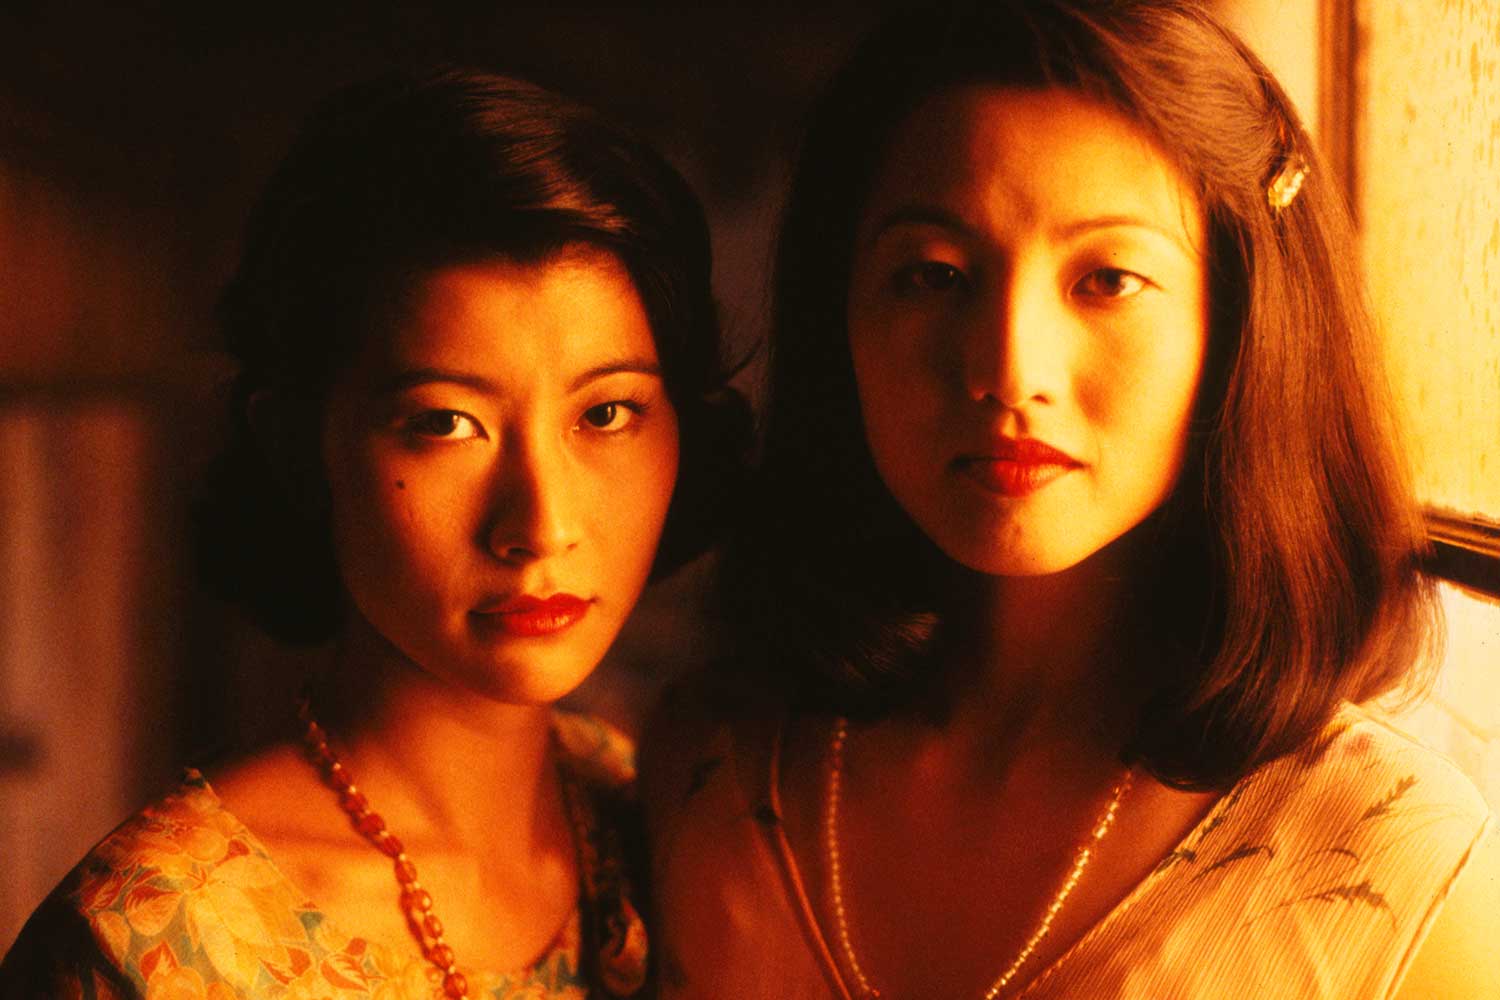 Akemi Nishino and Tamlyn Tomita in scene from Come See The Paradise